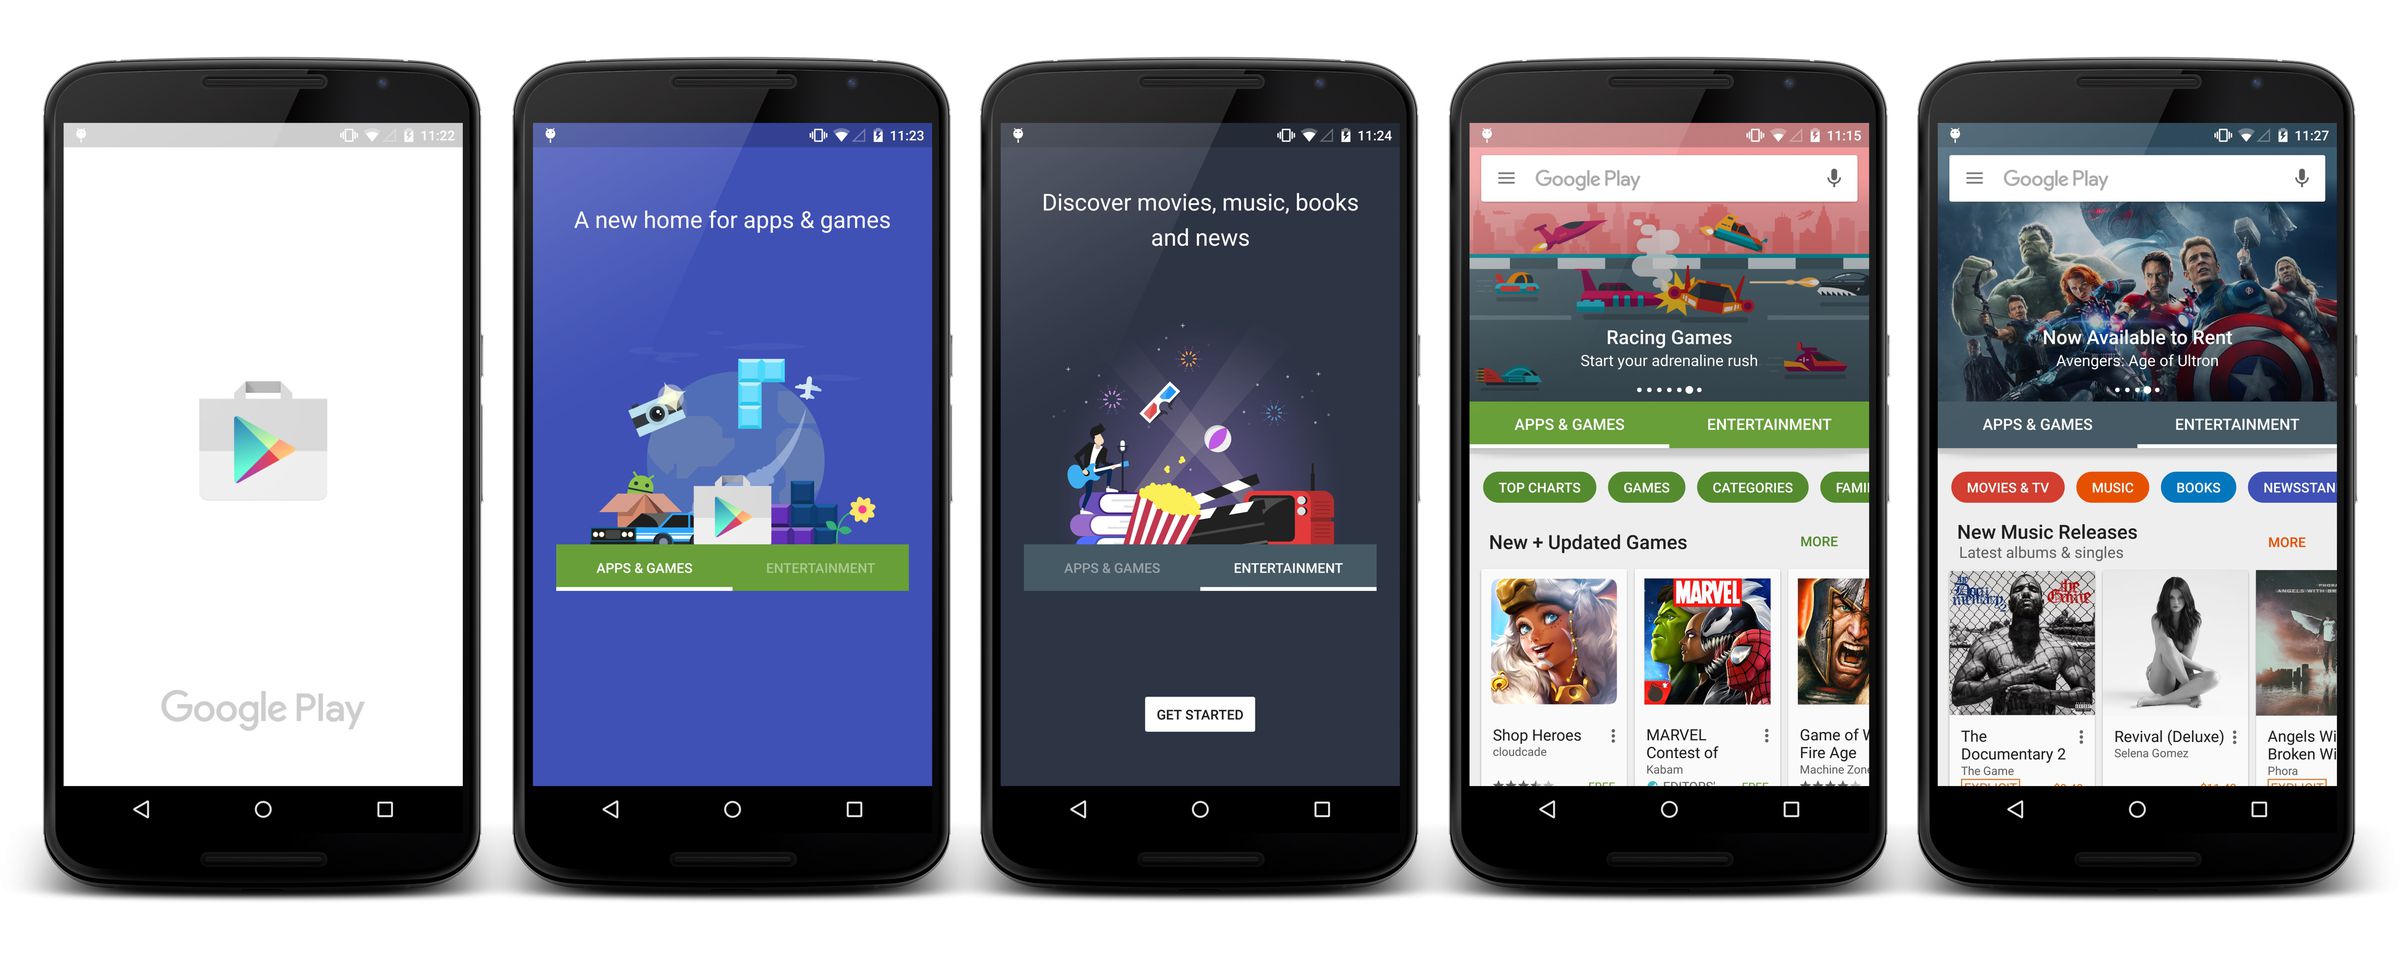 Google Play redesign